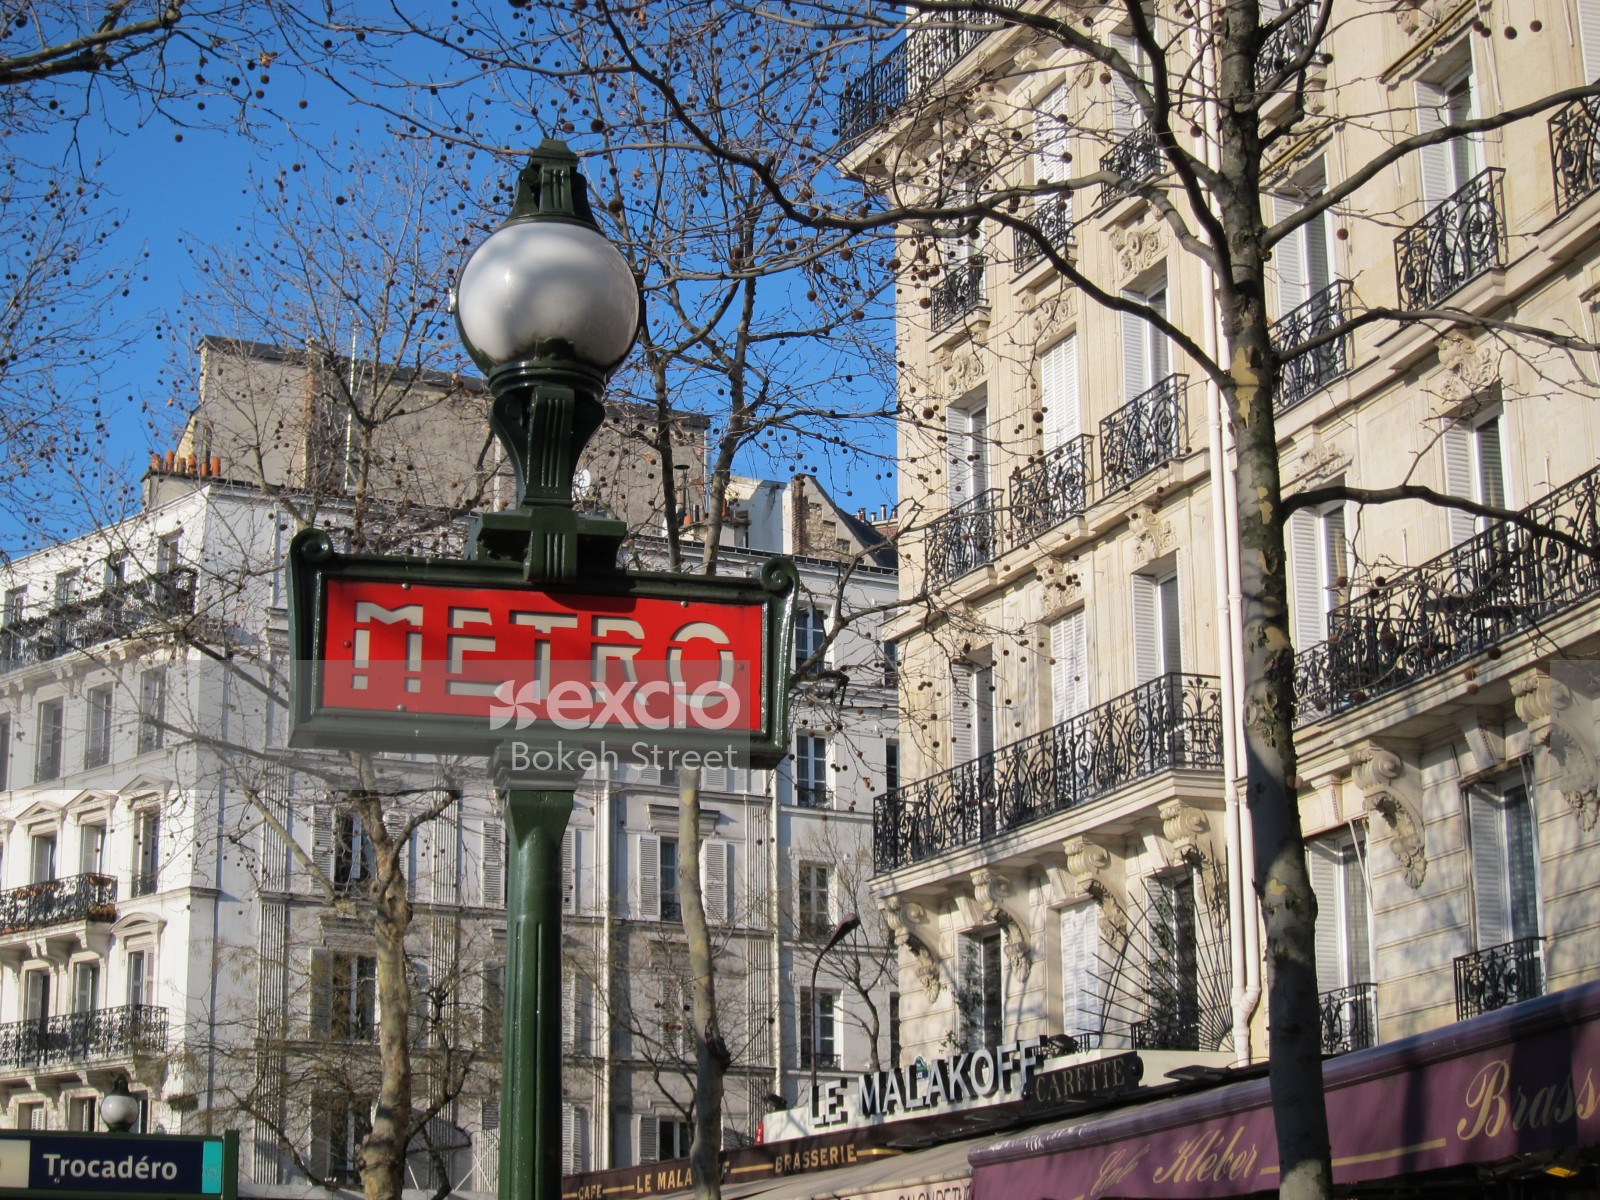 Street light and Paris metro signage in a street